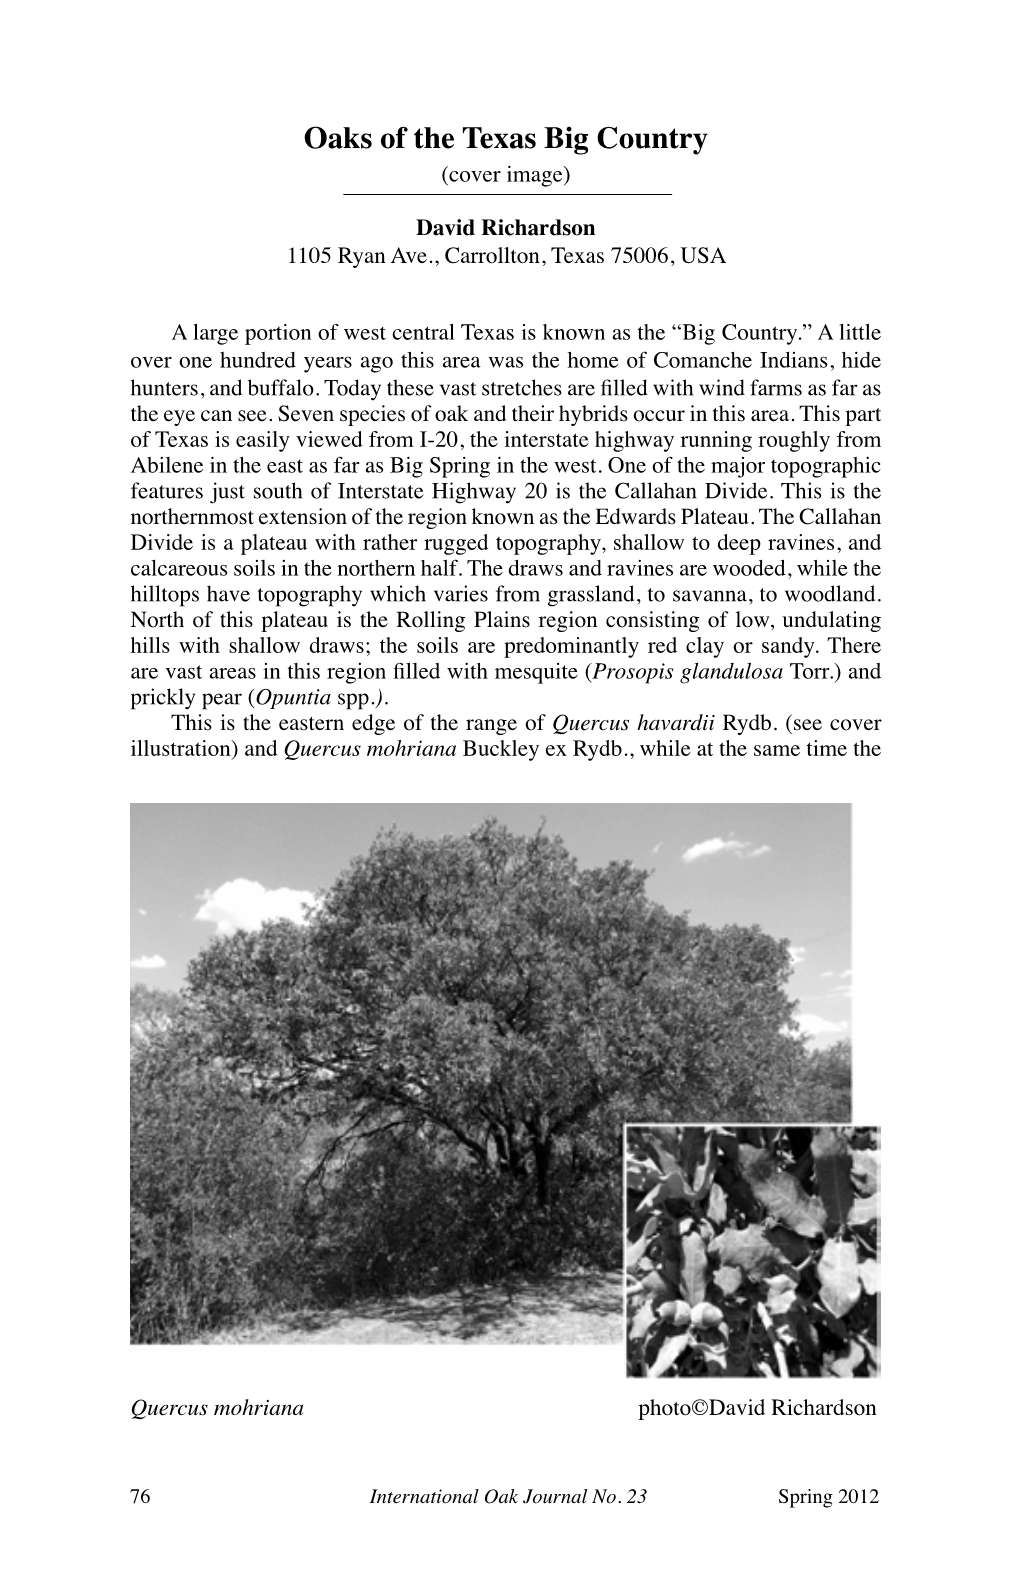 Oaks of the Texas Big Country (Cover Image)